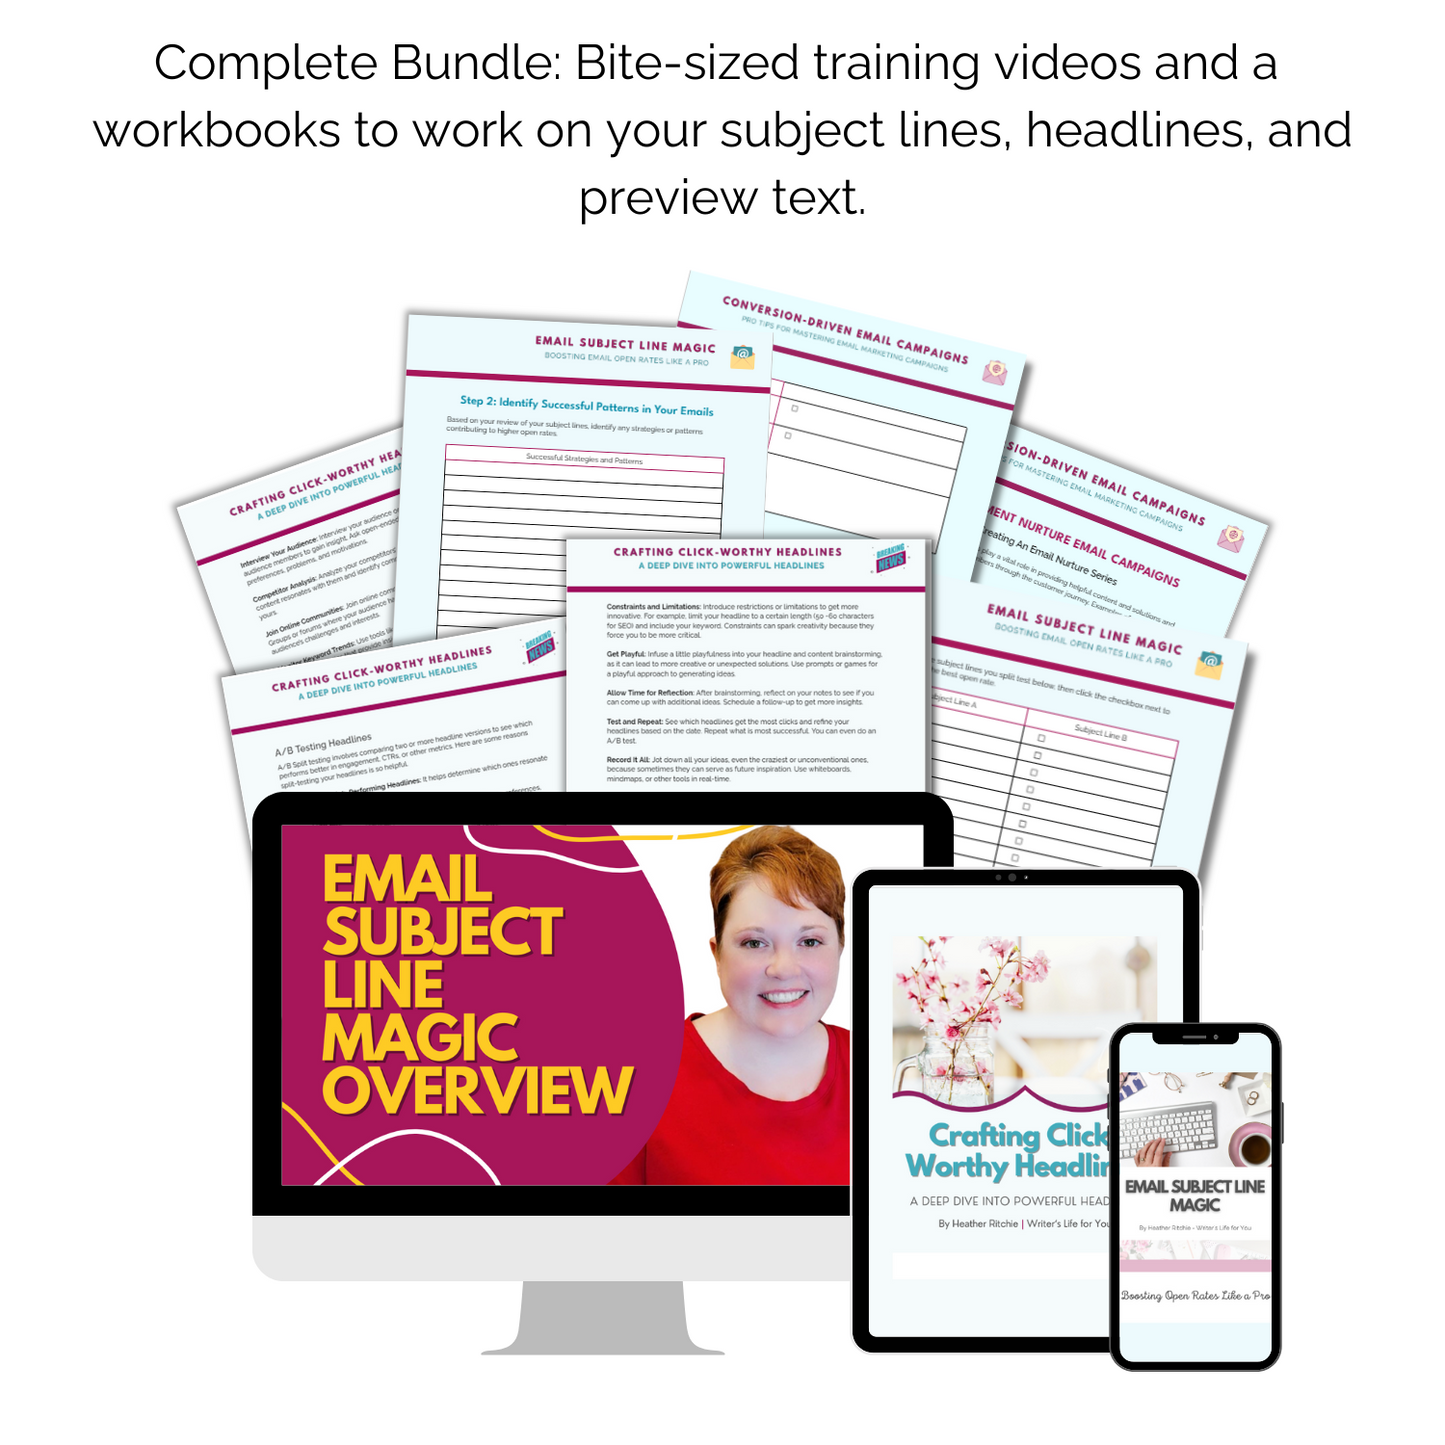 A collection of training materials titled "Headline & Subject Line Magic: Boost Clicks and Opens" by ContentPreneur Biz Shop. Includes printed pages, a booklet titled "Email Subject Line Magic Overview", a tablet displaying "Crafting Click Worthy Headlines", and a smartphone.